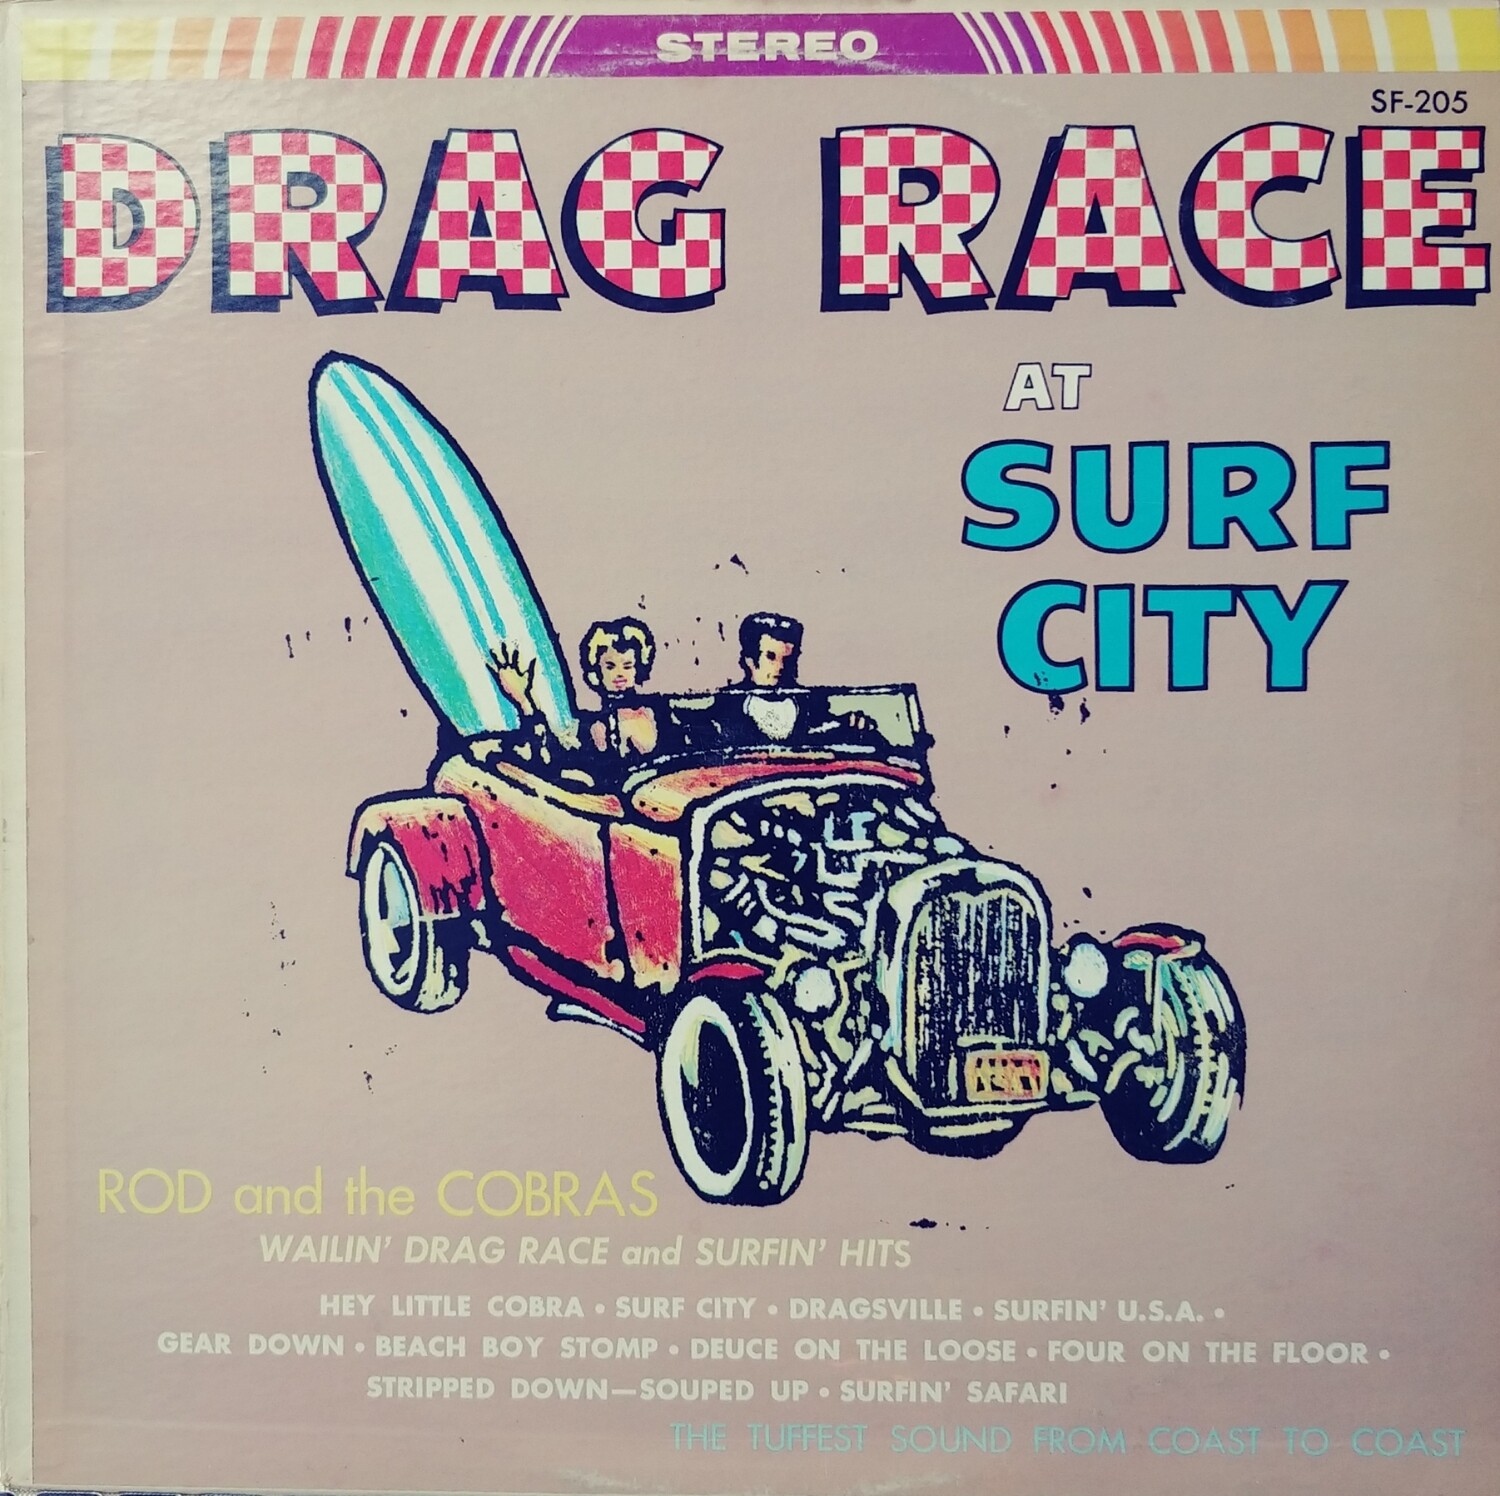 Rod and The Cobras - Drag Race at Surf City